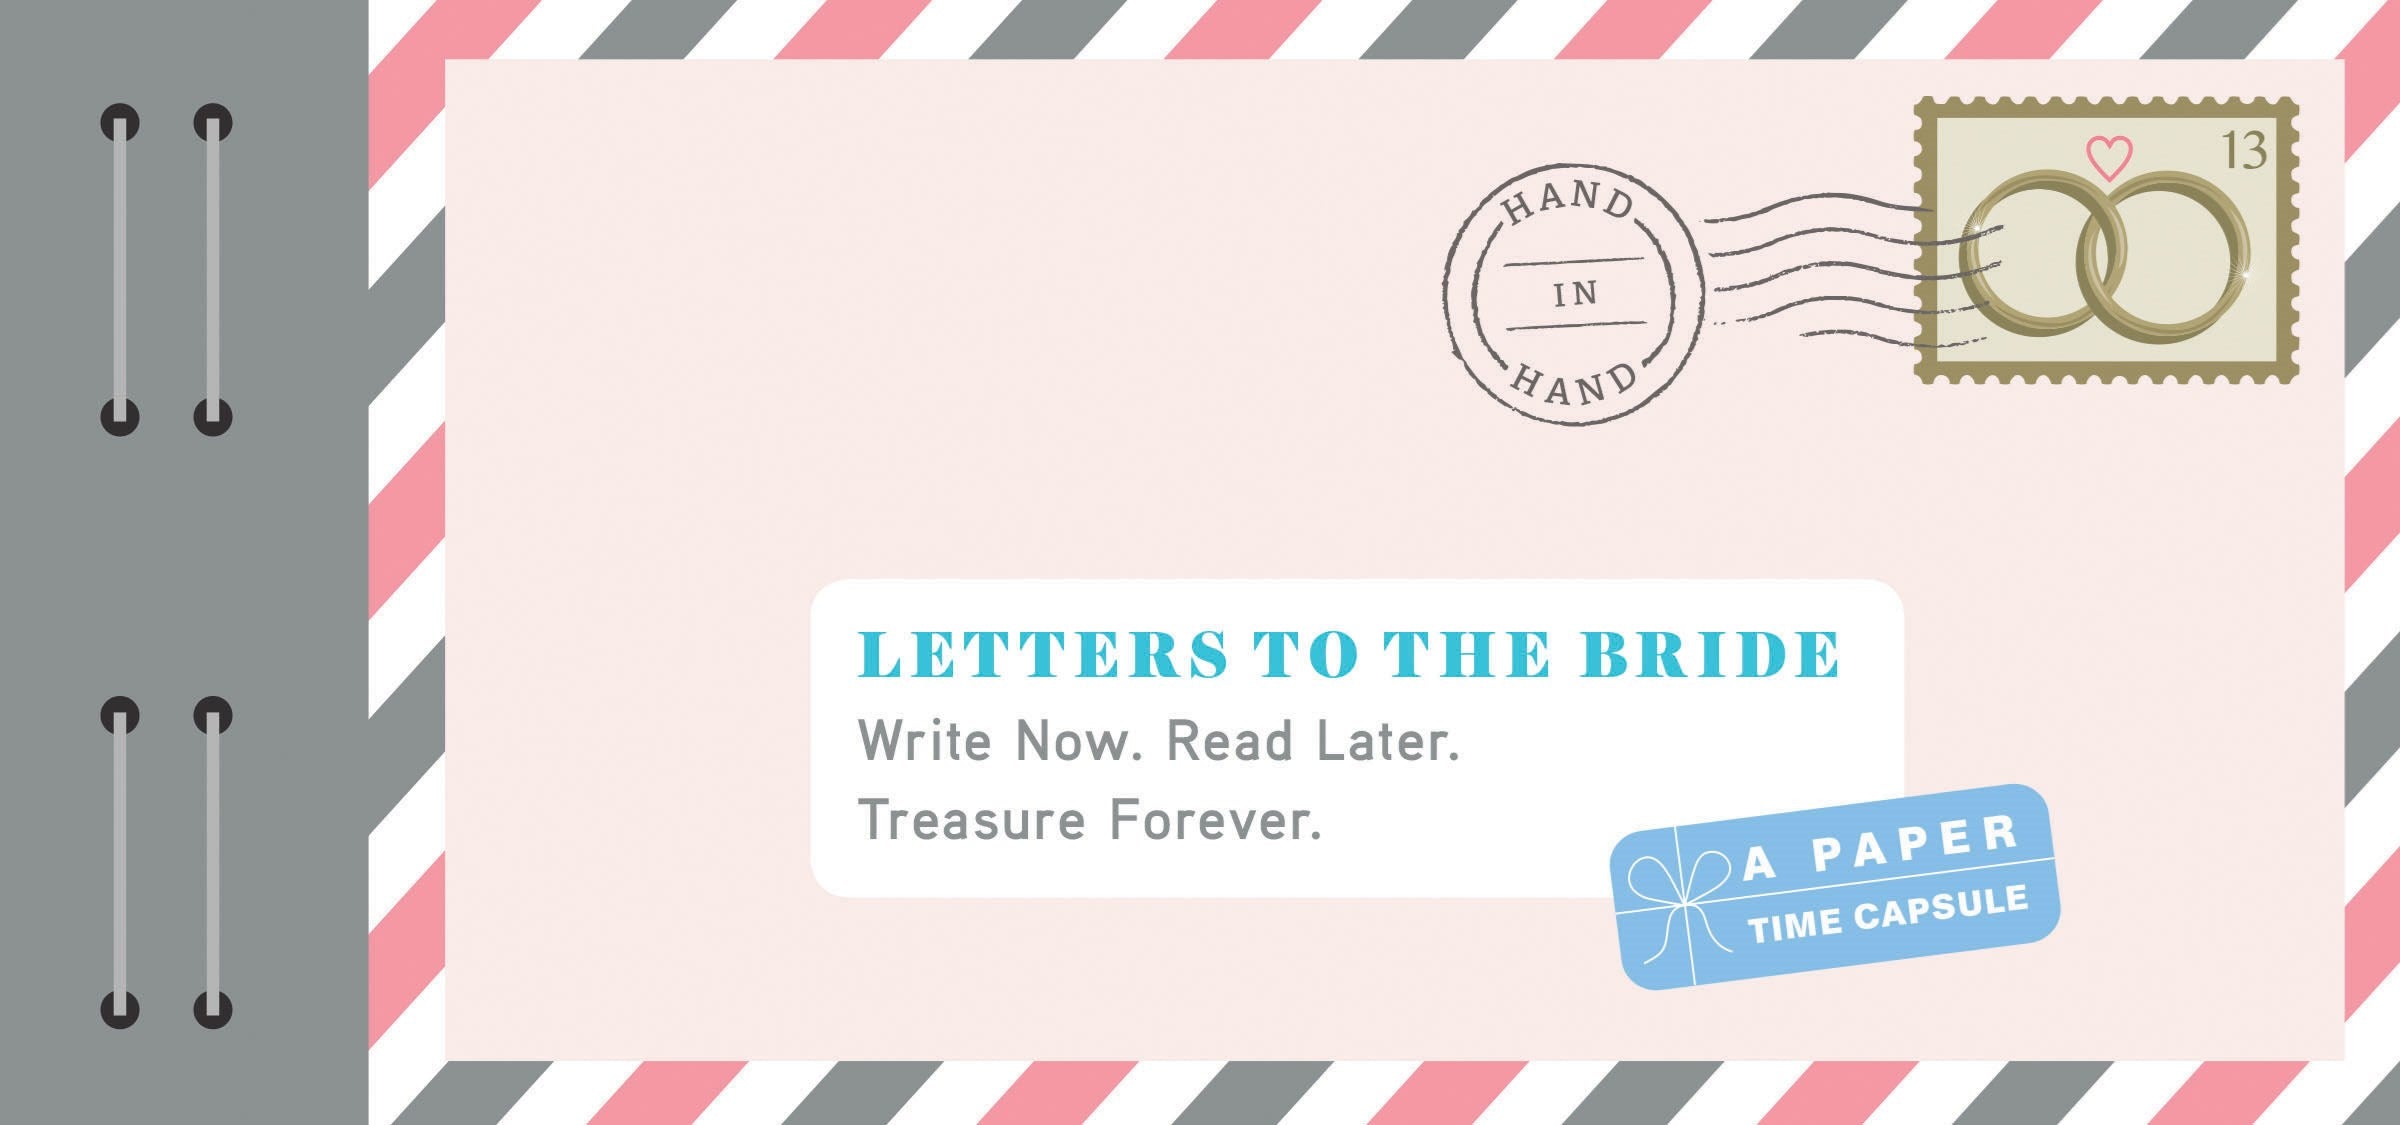 Letters to the Bride: Write Now. Read Later. Treasure Forever. (Newlywed Gifts, Gifts for New Brides, Wedding Gifts for the Bride)